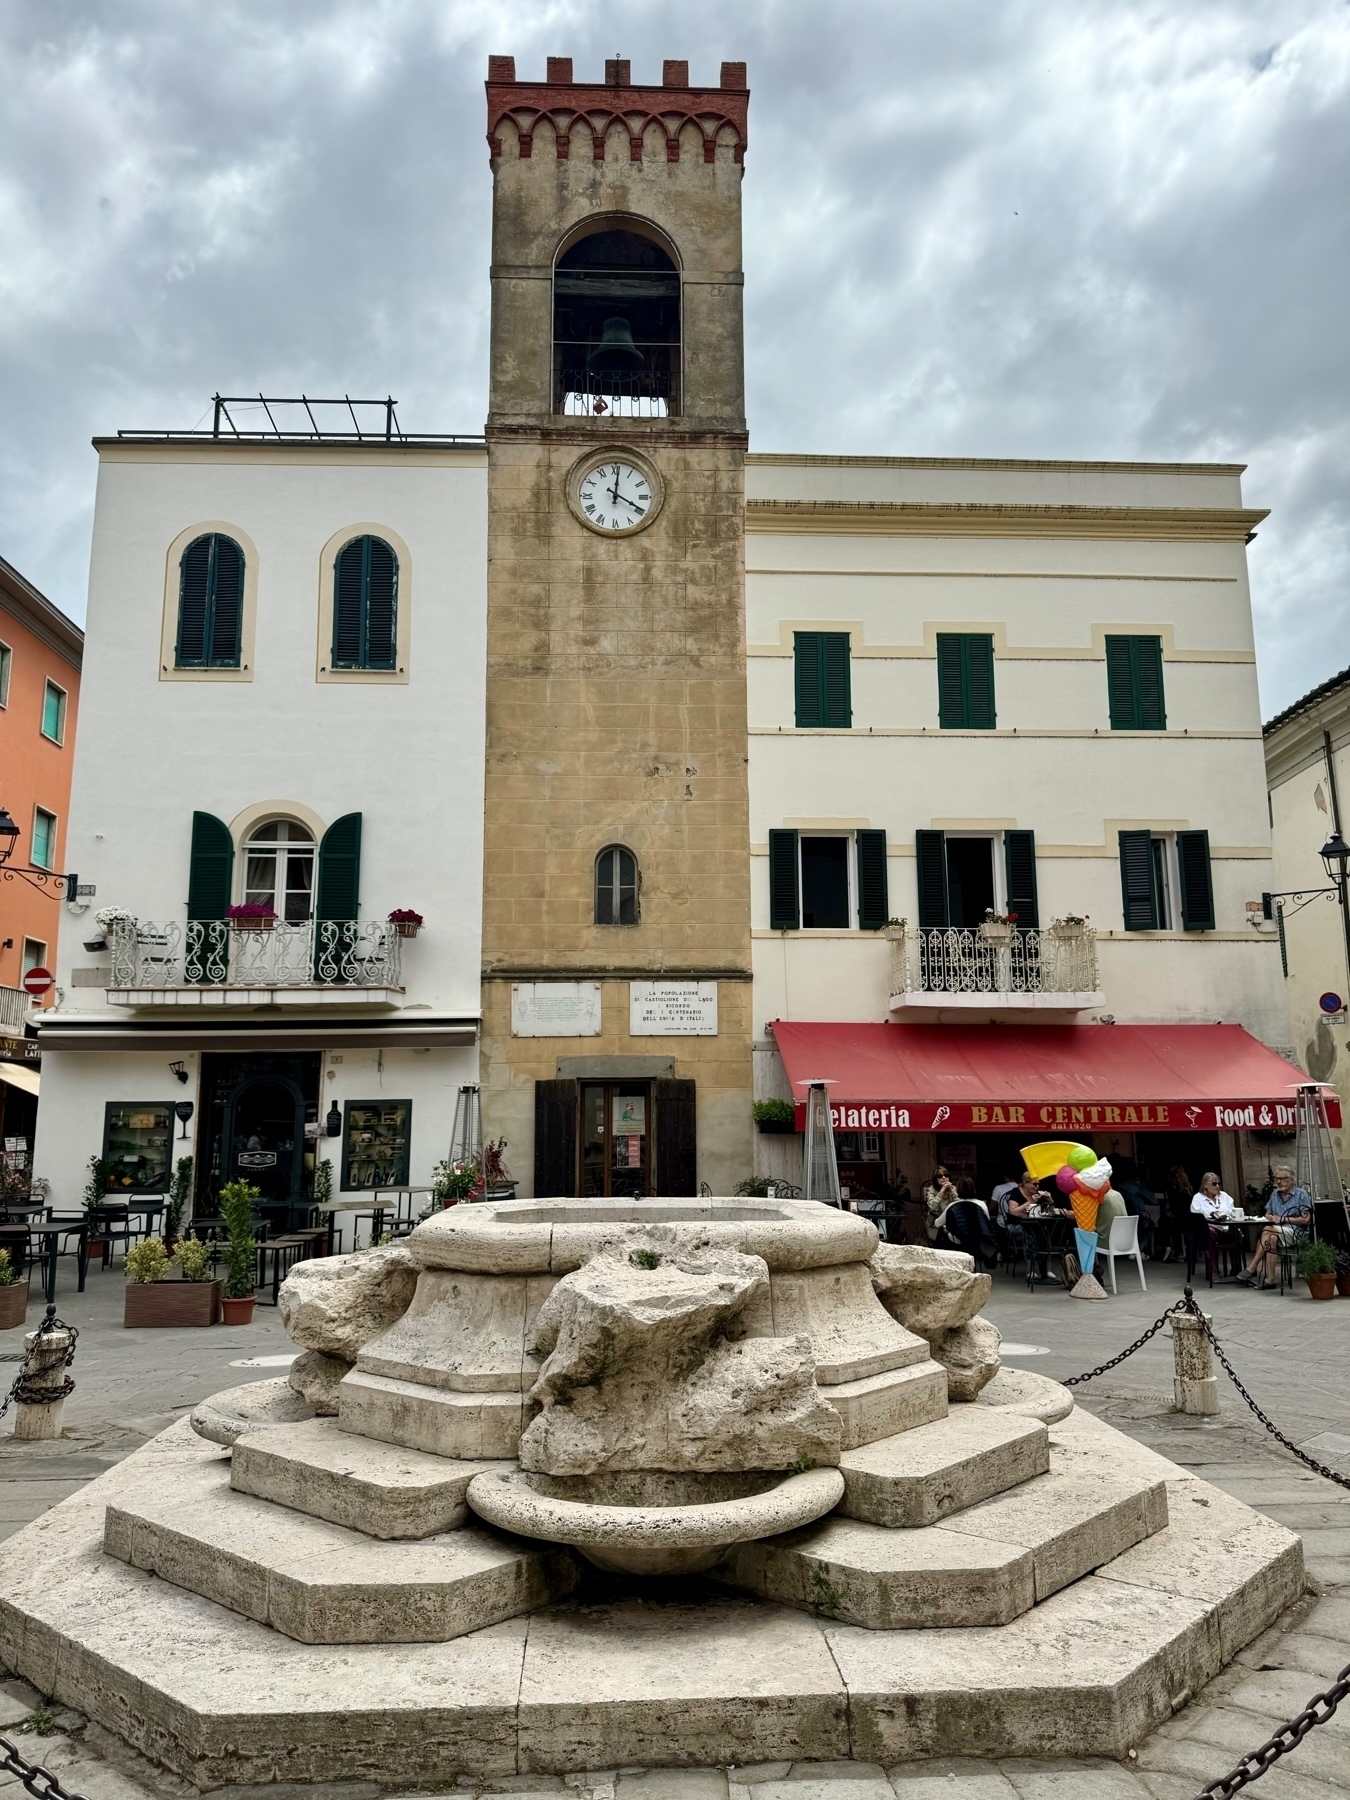 A historical town square featuring a medieval clock tower with a bell, flanked by buildings with green shutters and balconies. In the foreground, there is a stone fountain, and to the right, a café with outdoor seating under a red awning. 